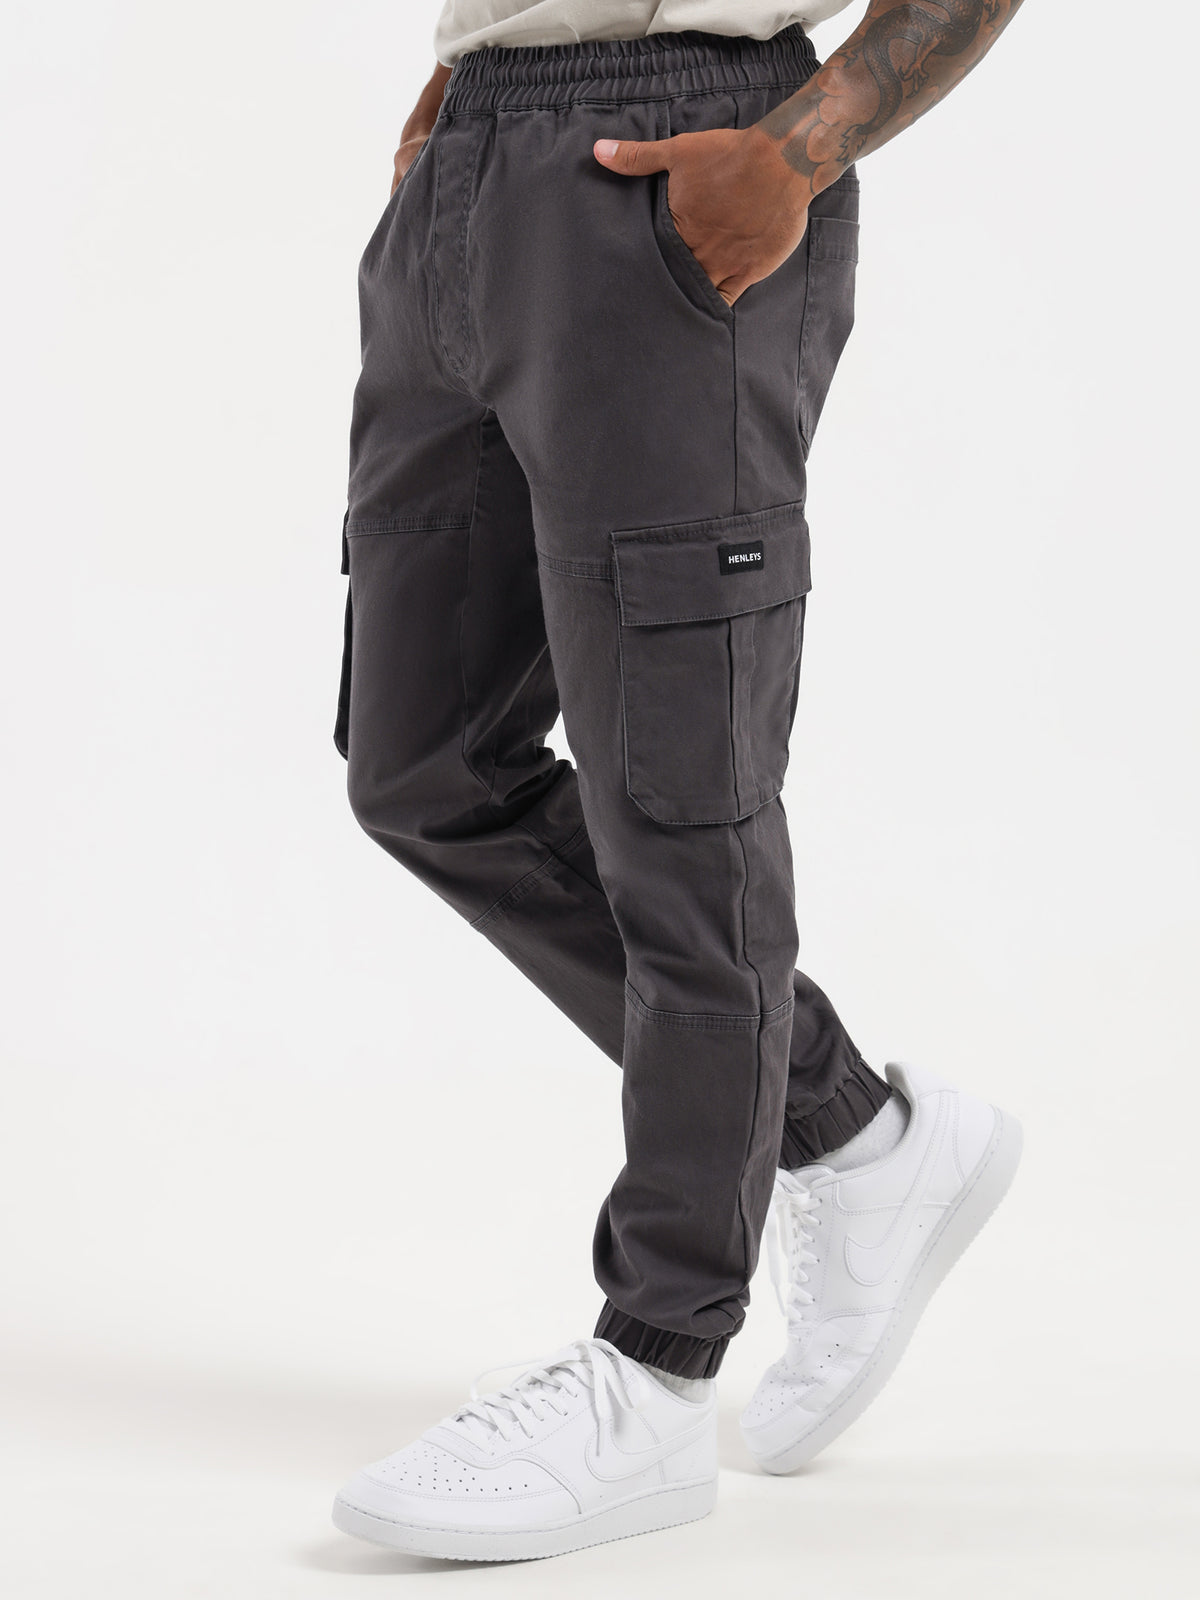 Formation Utility Jogger in Coal